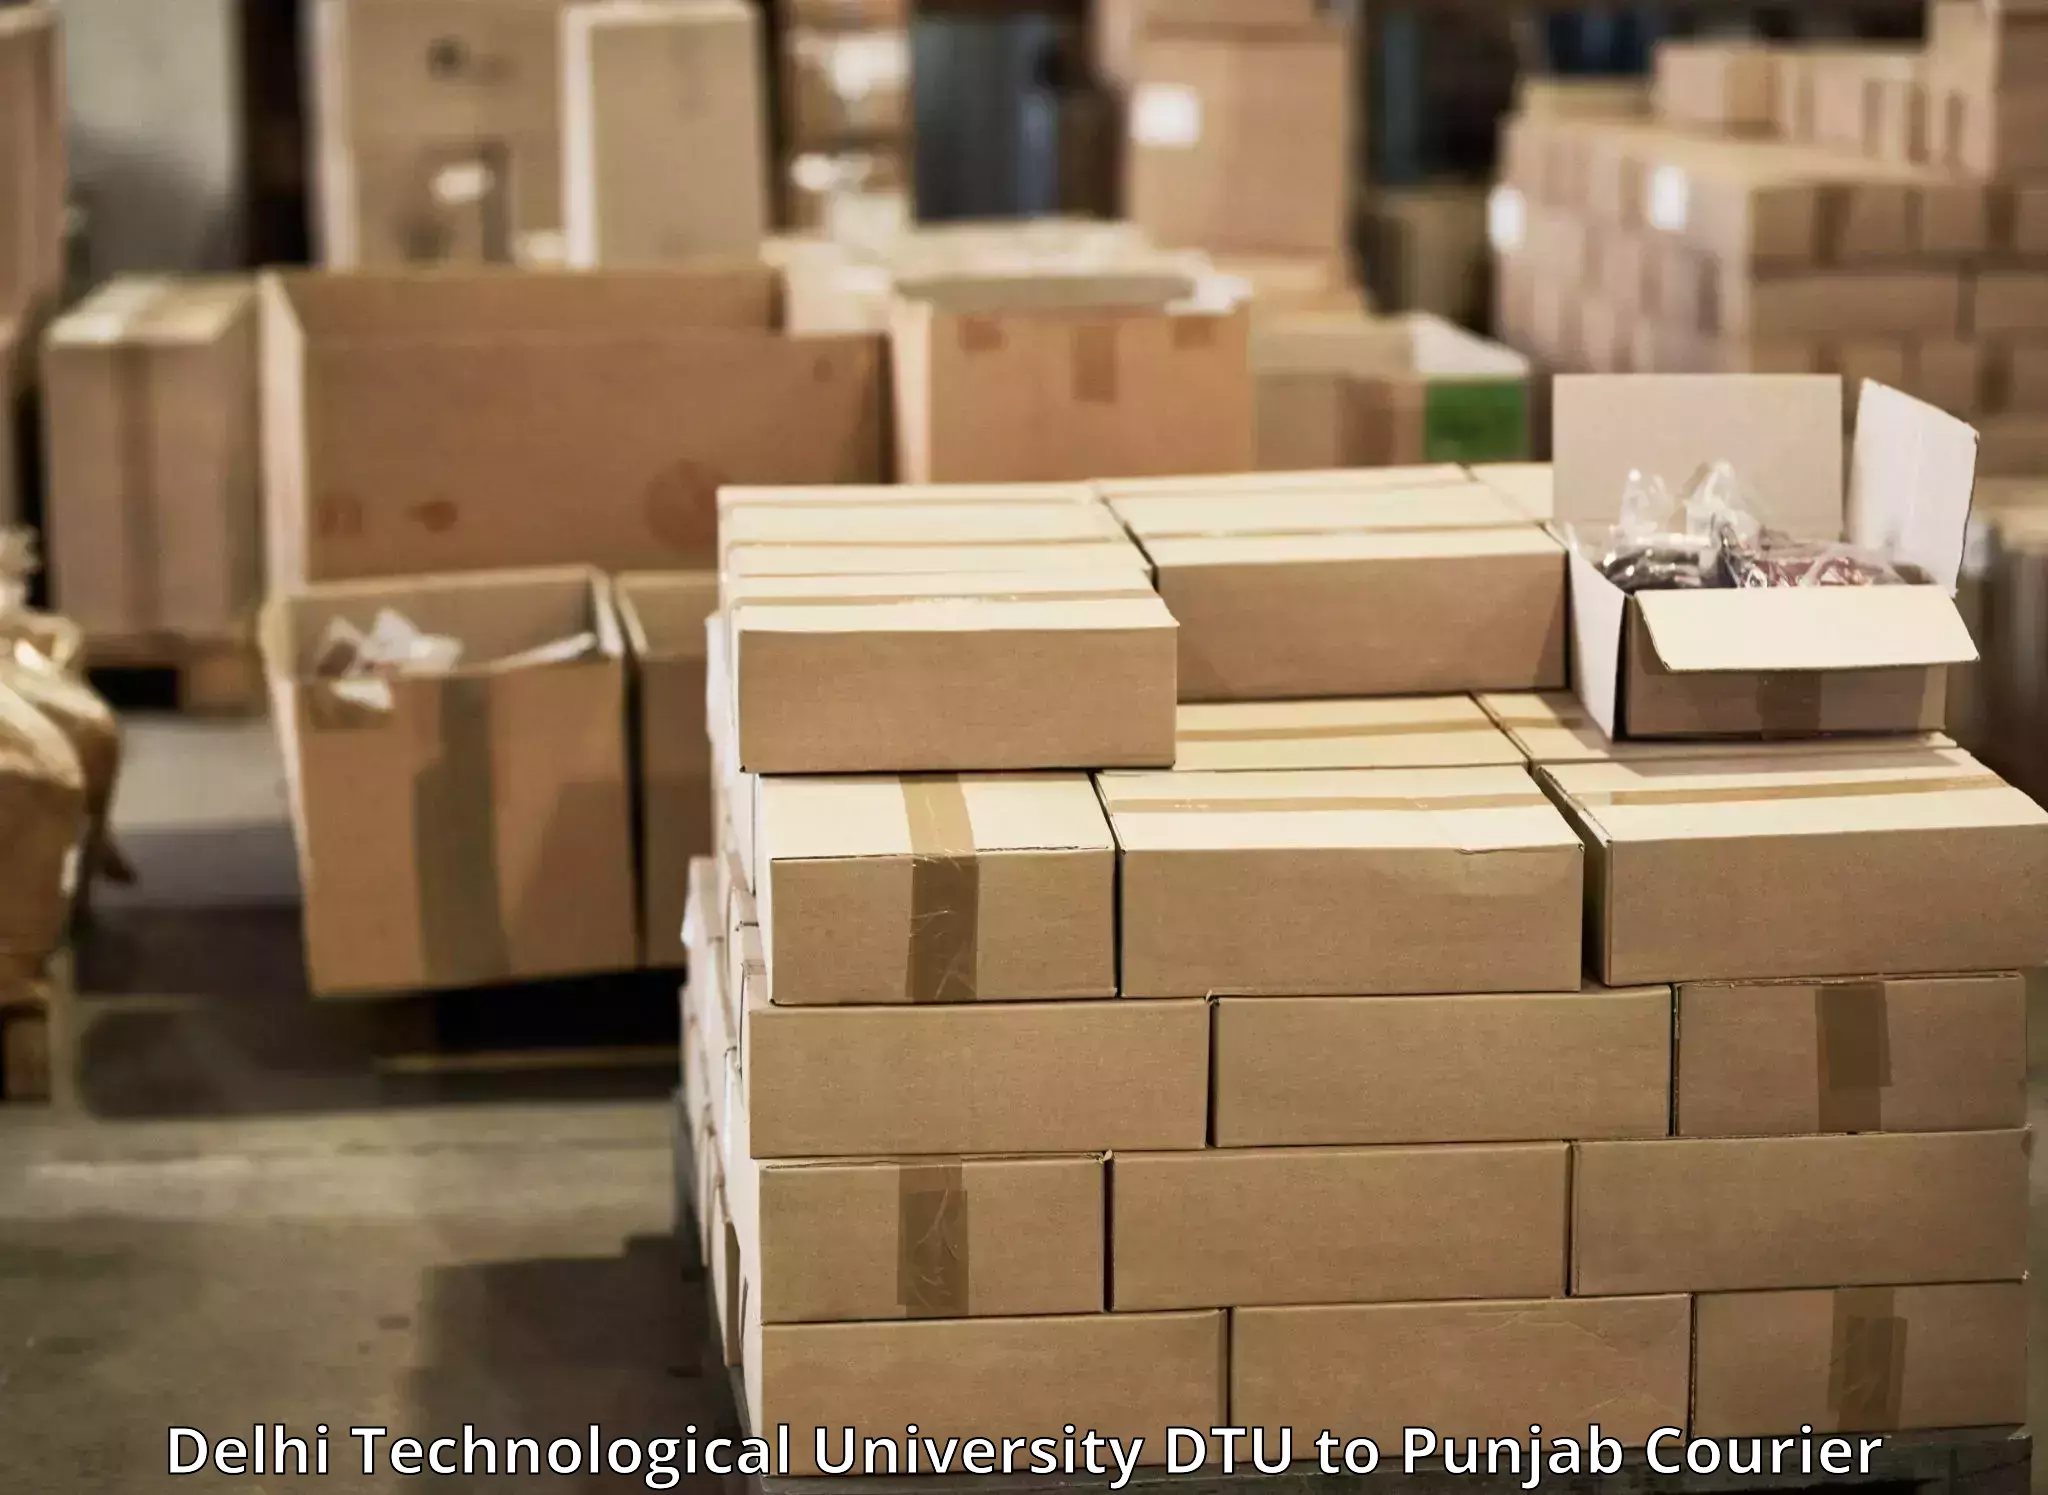 Nationwide shipping services Delhi Technological University DTU to Jagraon